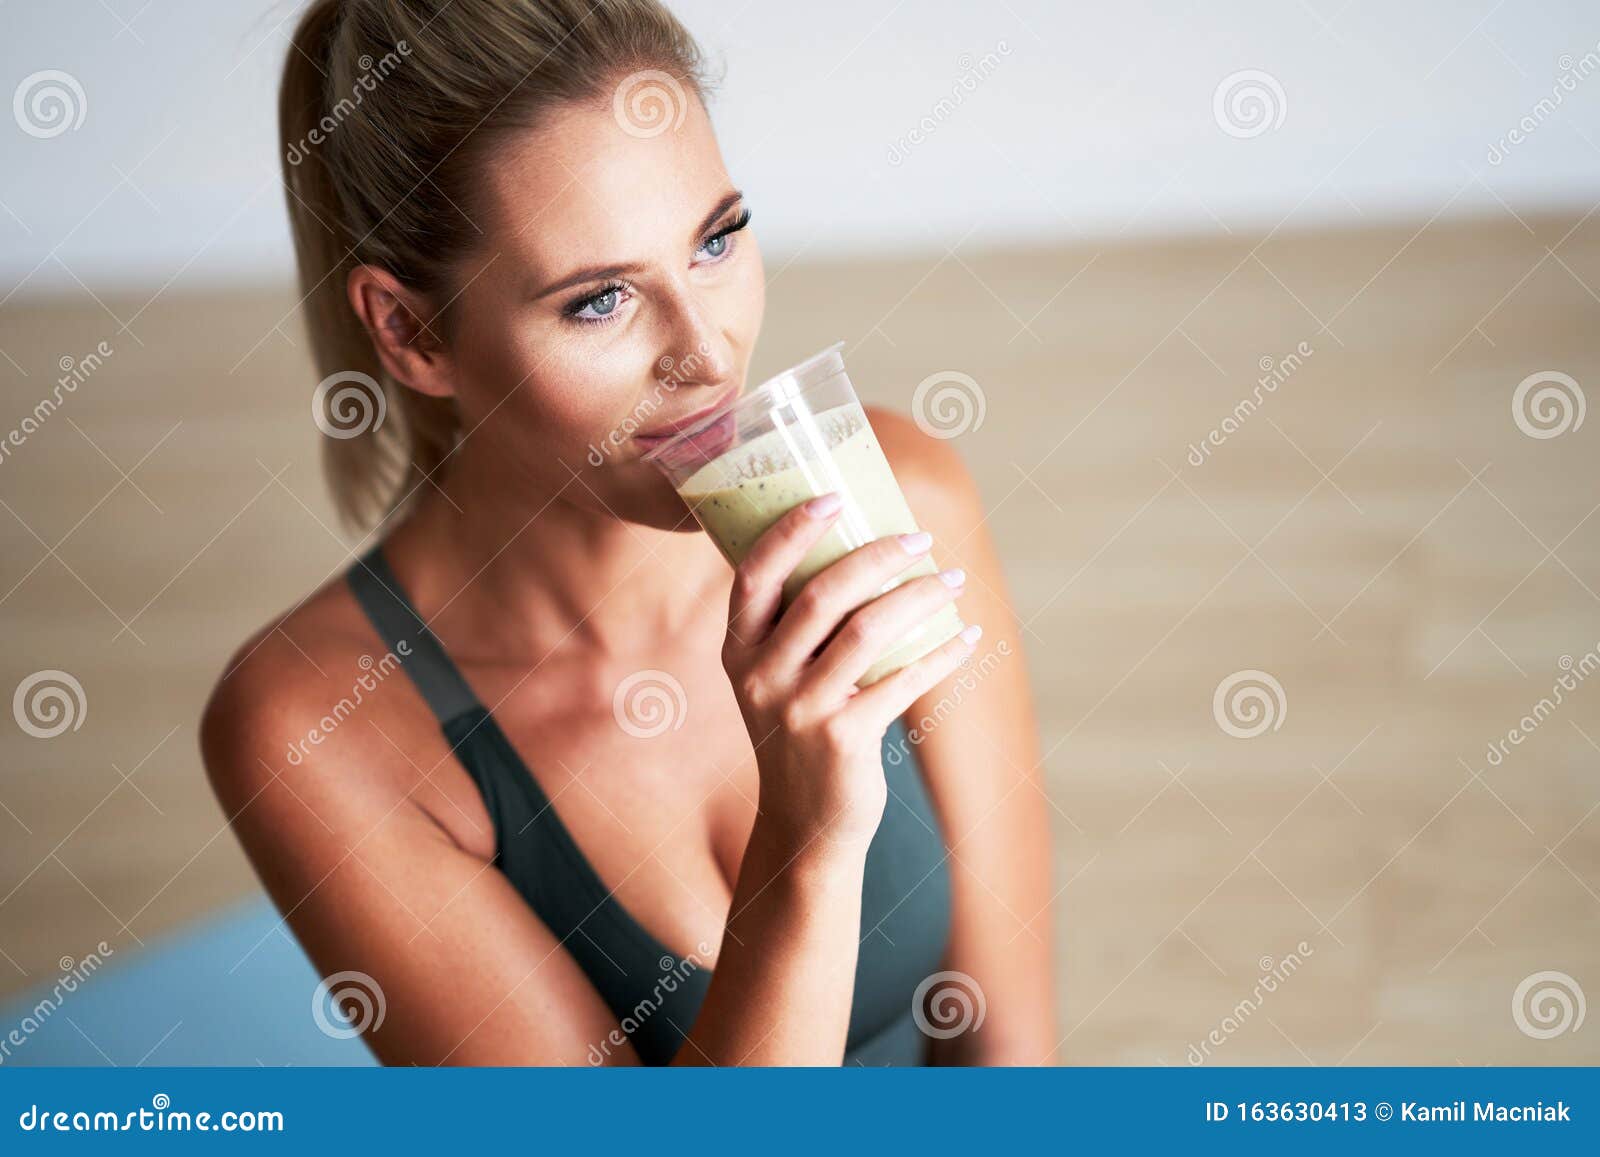 Adult Woman Drinking Healthy Smoothie After Workout Stock Image Image